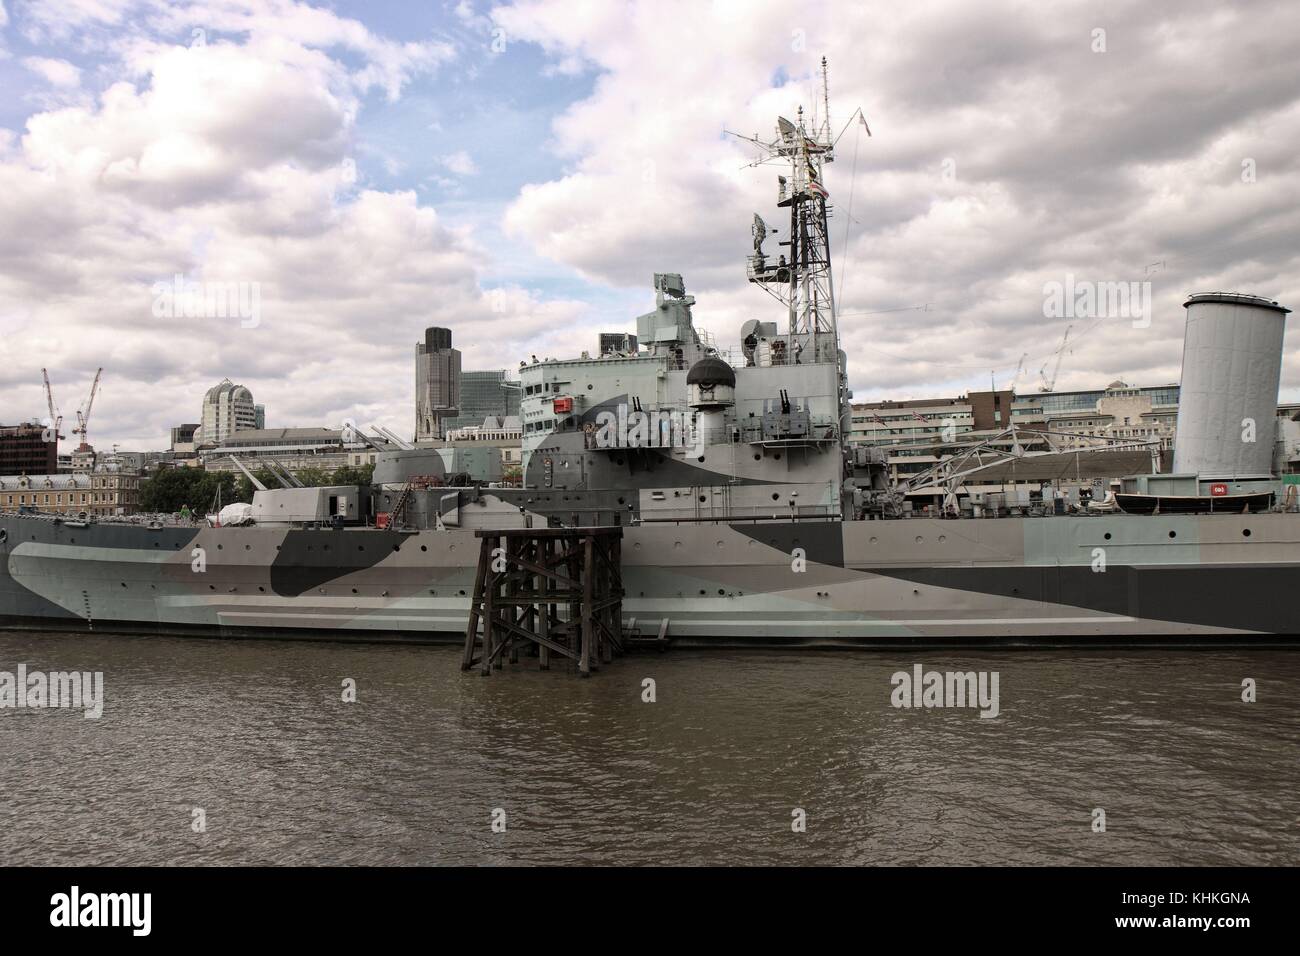 HMS Belfast - HMS Belfast is a museum ship, originally a light cruiser built for the Royal Navy, currently moored on the River Thames in London Stock Photo